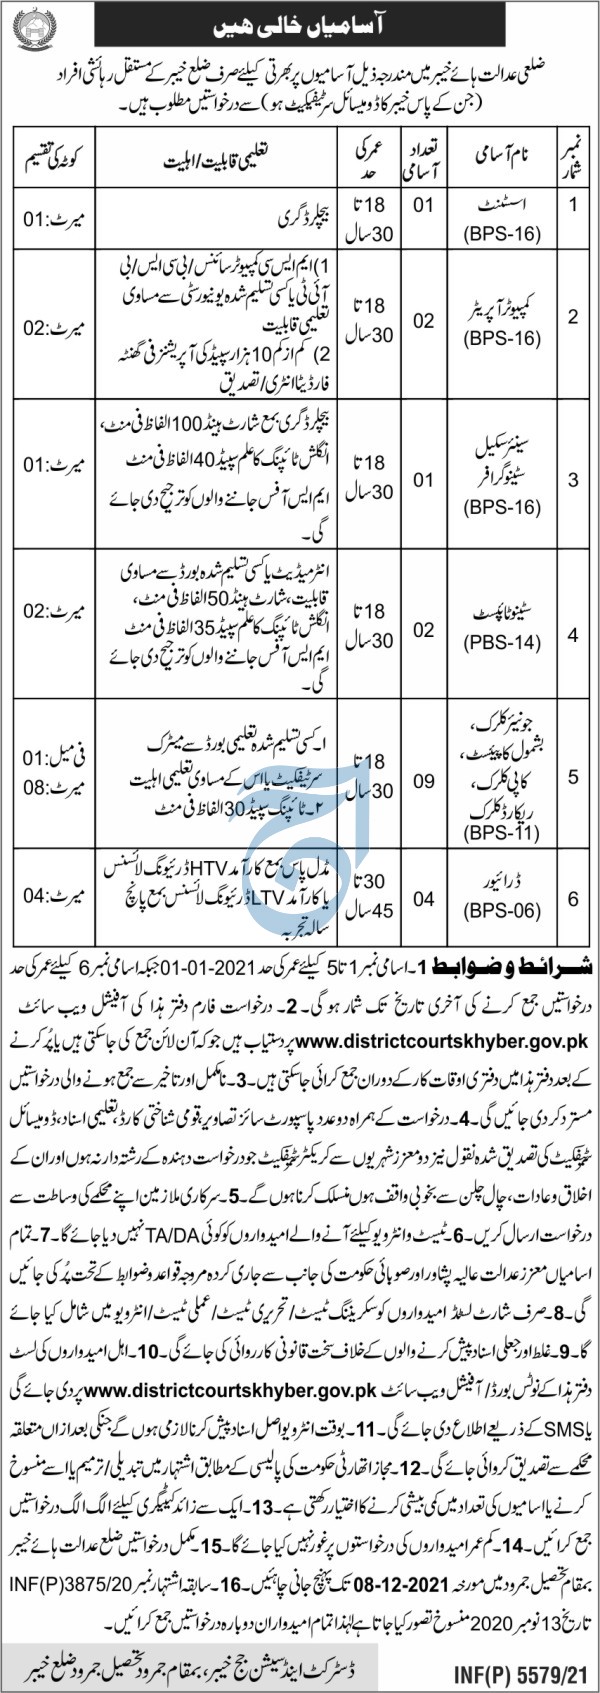 District Courts Khyber Jobs 2021 – Download Application Form